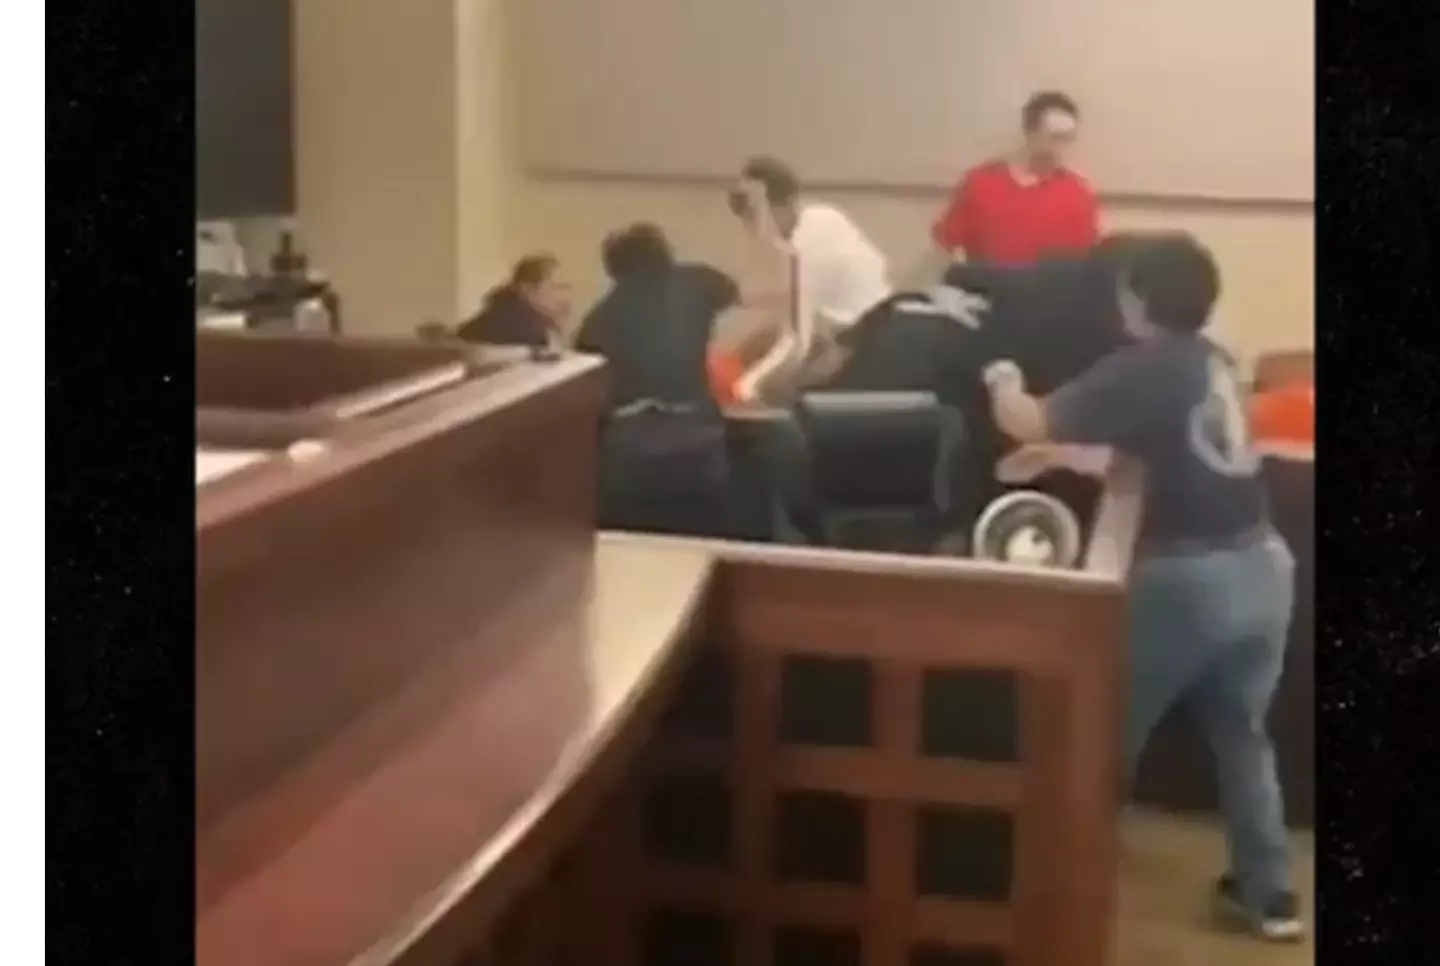 A brawl broke out in court.